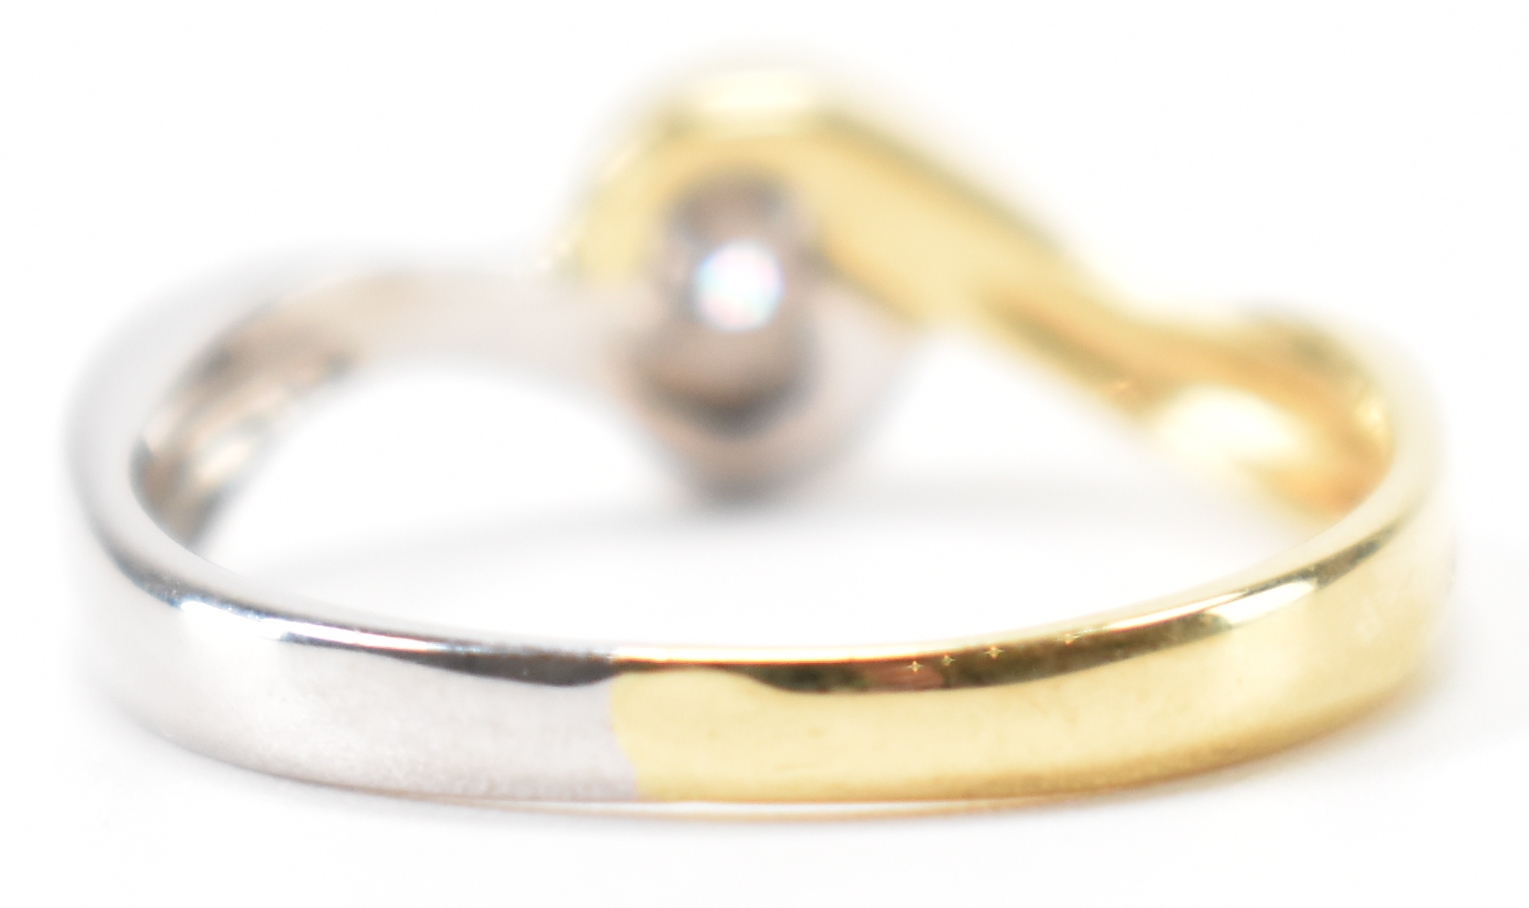 TWO TONE GOLD & DIAMOND CROSSOVER RING - Image 4 of 9